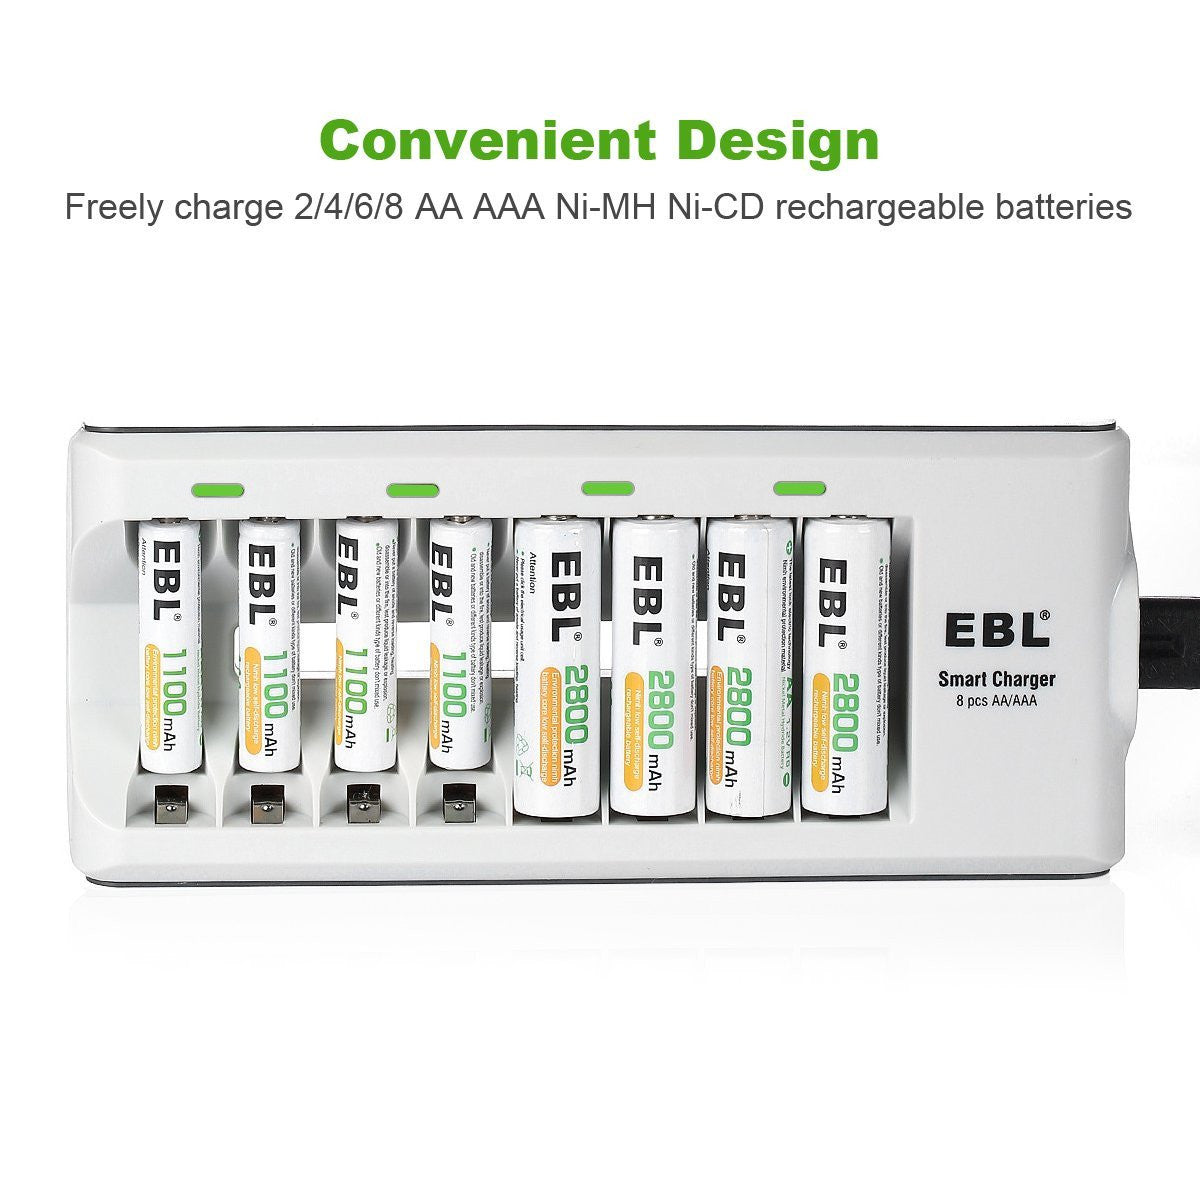 EBL 4-Pack 2800mAh AA Batteries + 1100mAh AAA Batteries + 8 Bay Battery  Charger for AA AAA Ni-CD Ni-MH Rechargeable Batteries